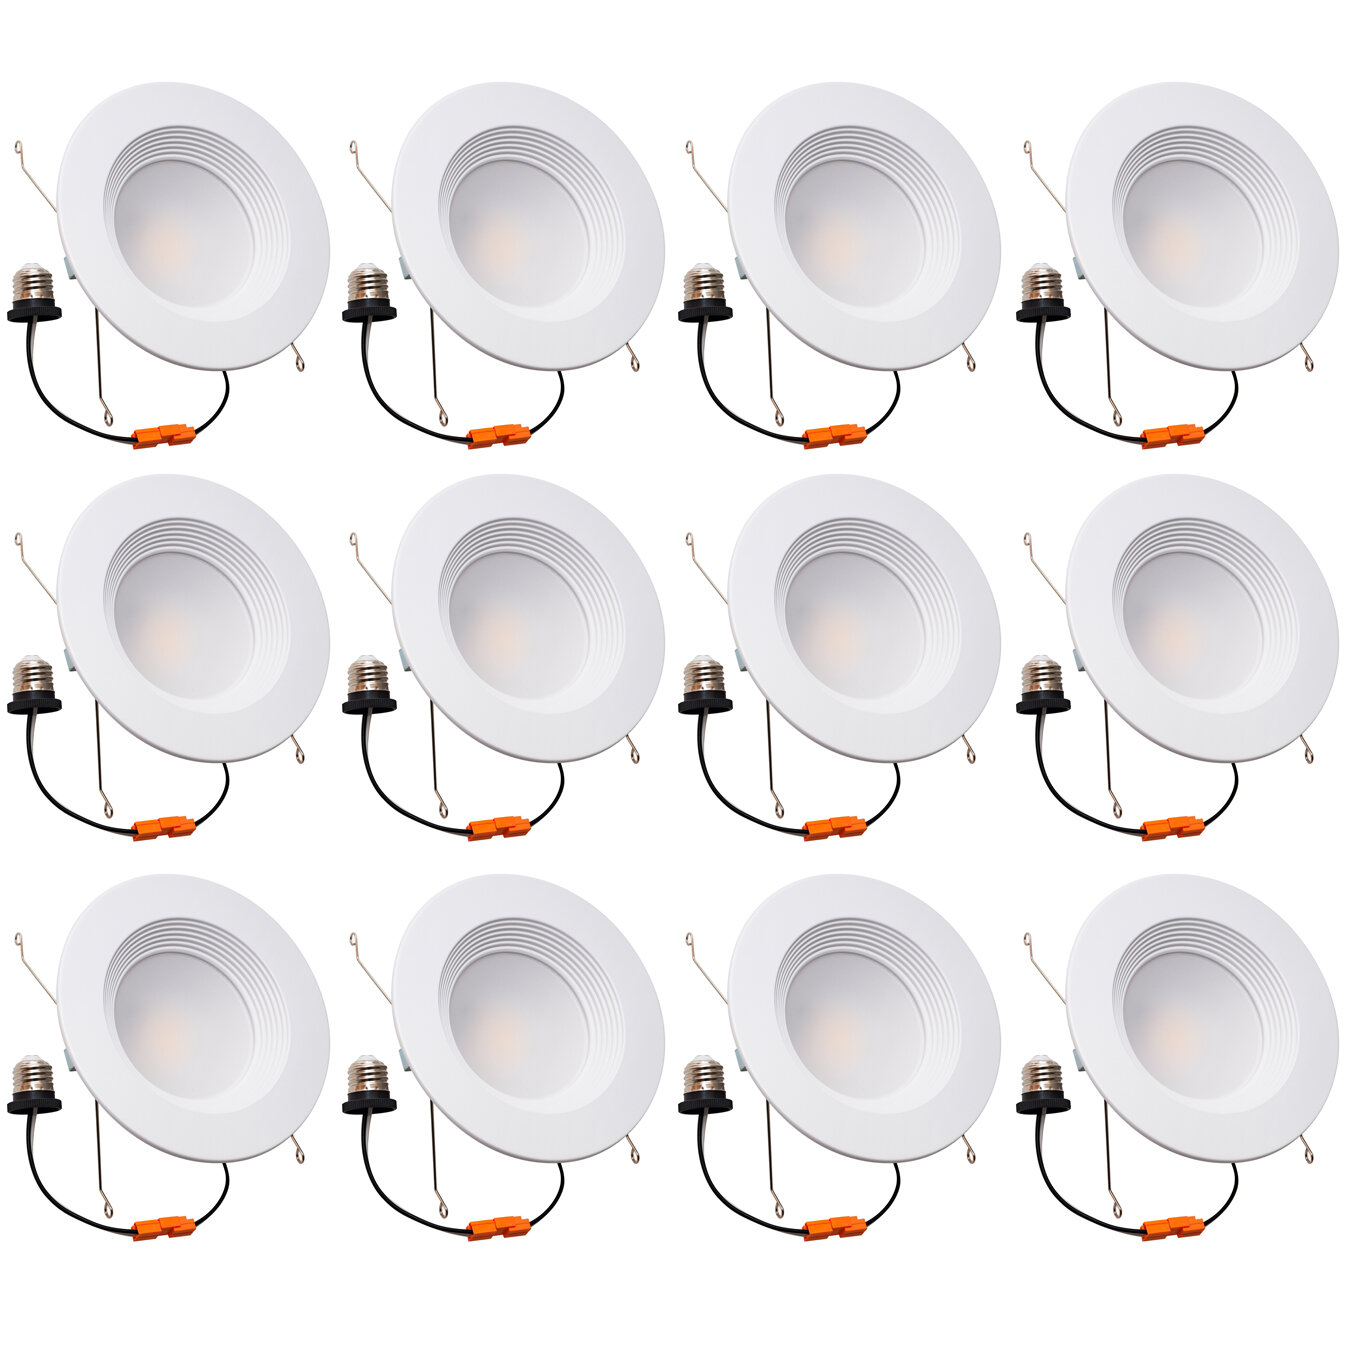 5/6" Inch Dimmable LED Retrofit Recessed Downlight Ships Same Day 1100lm 15W 